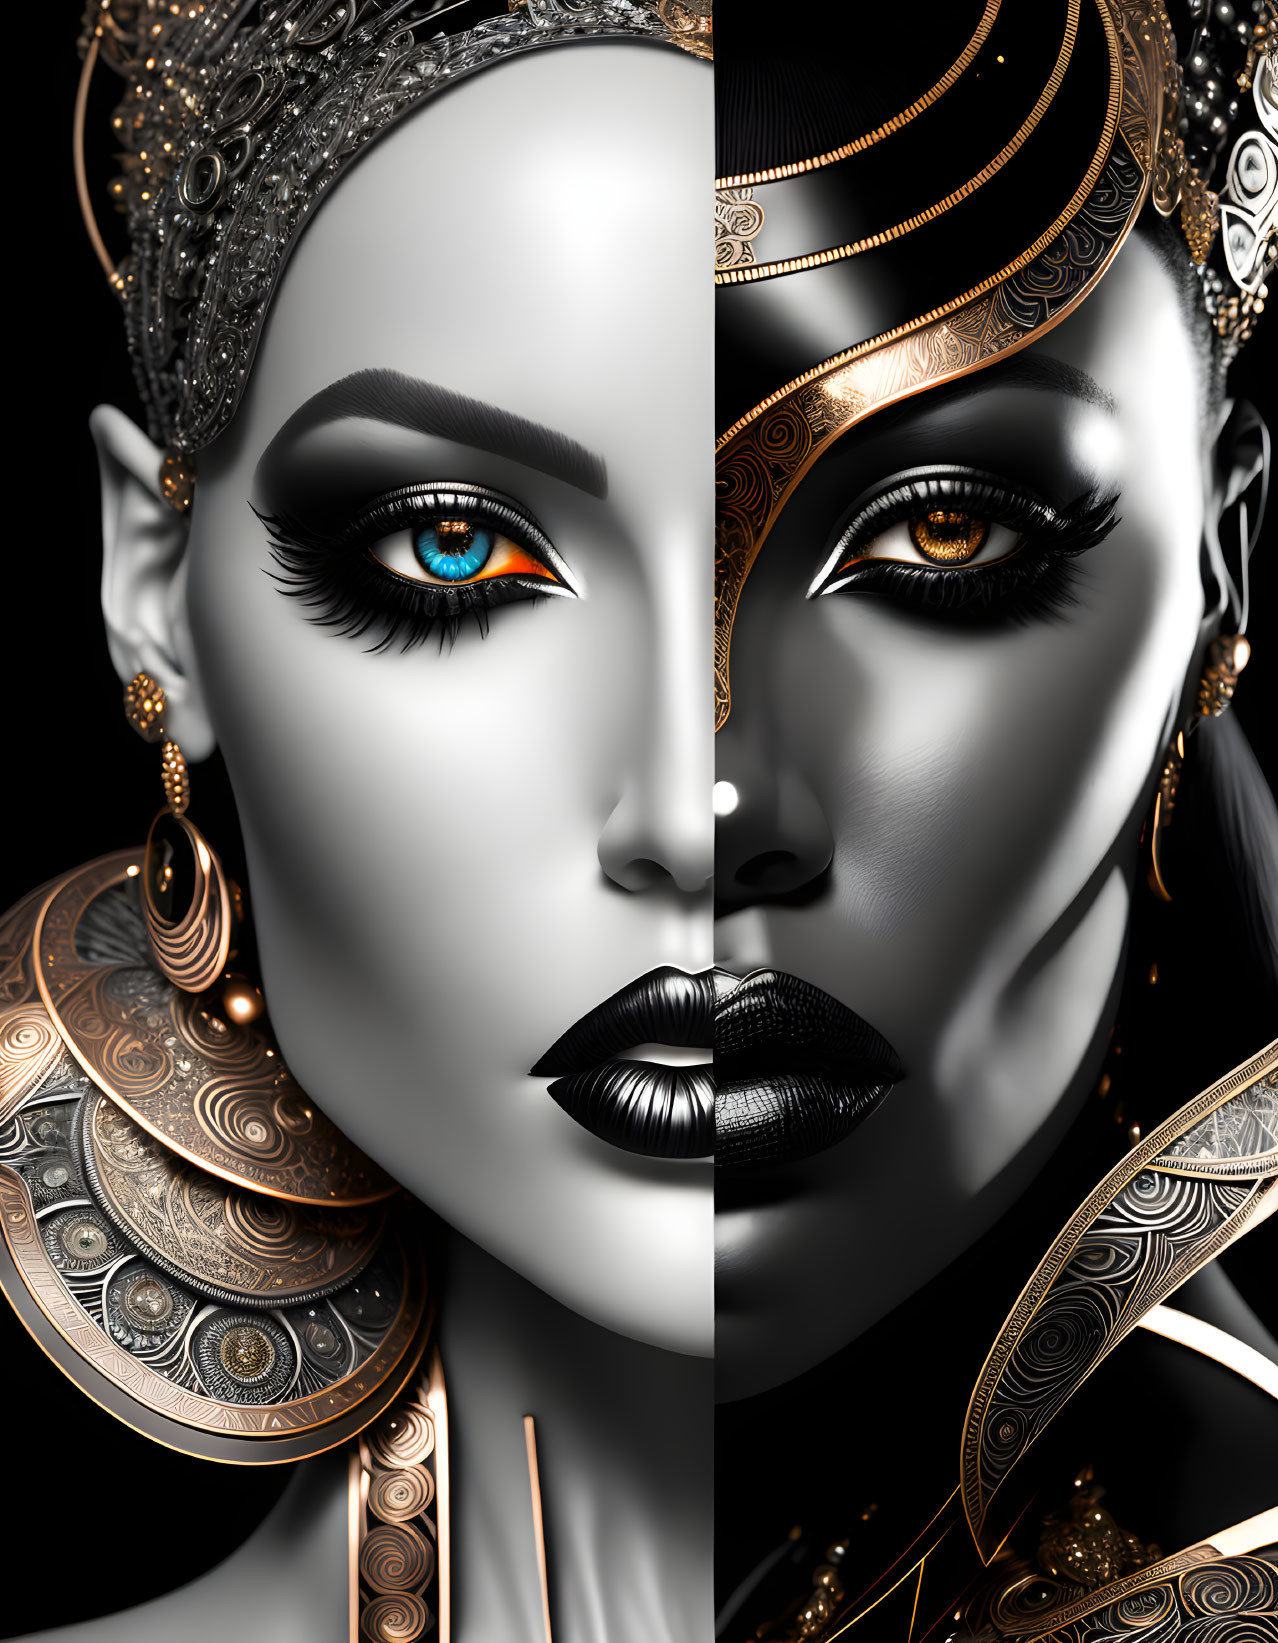 Stylized faces with ornate headpieces and earrings in silver and bronze tones